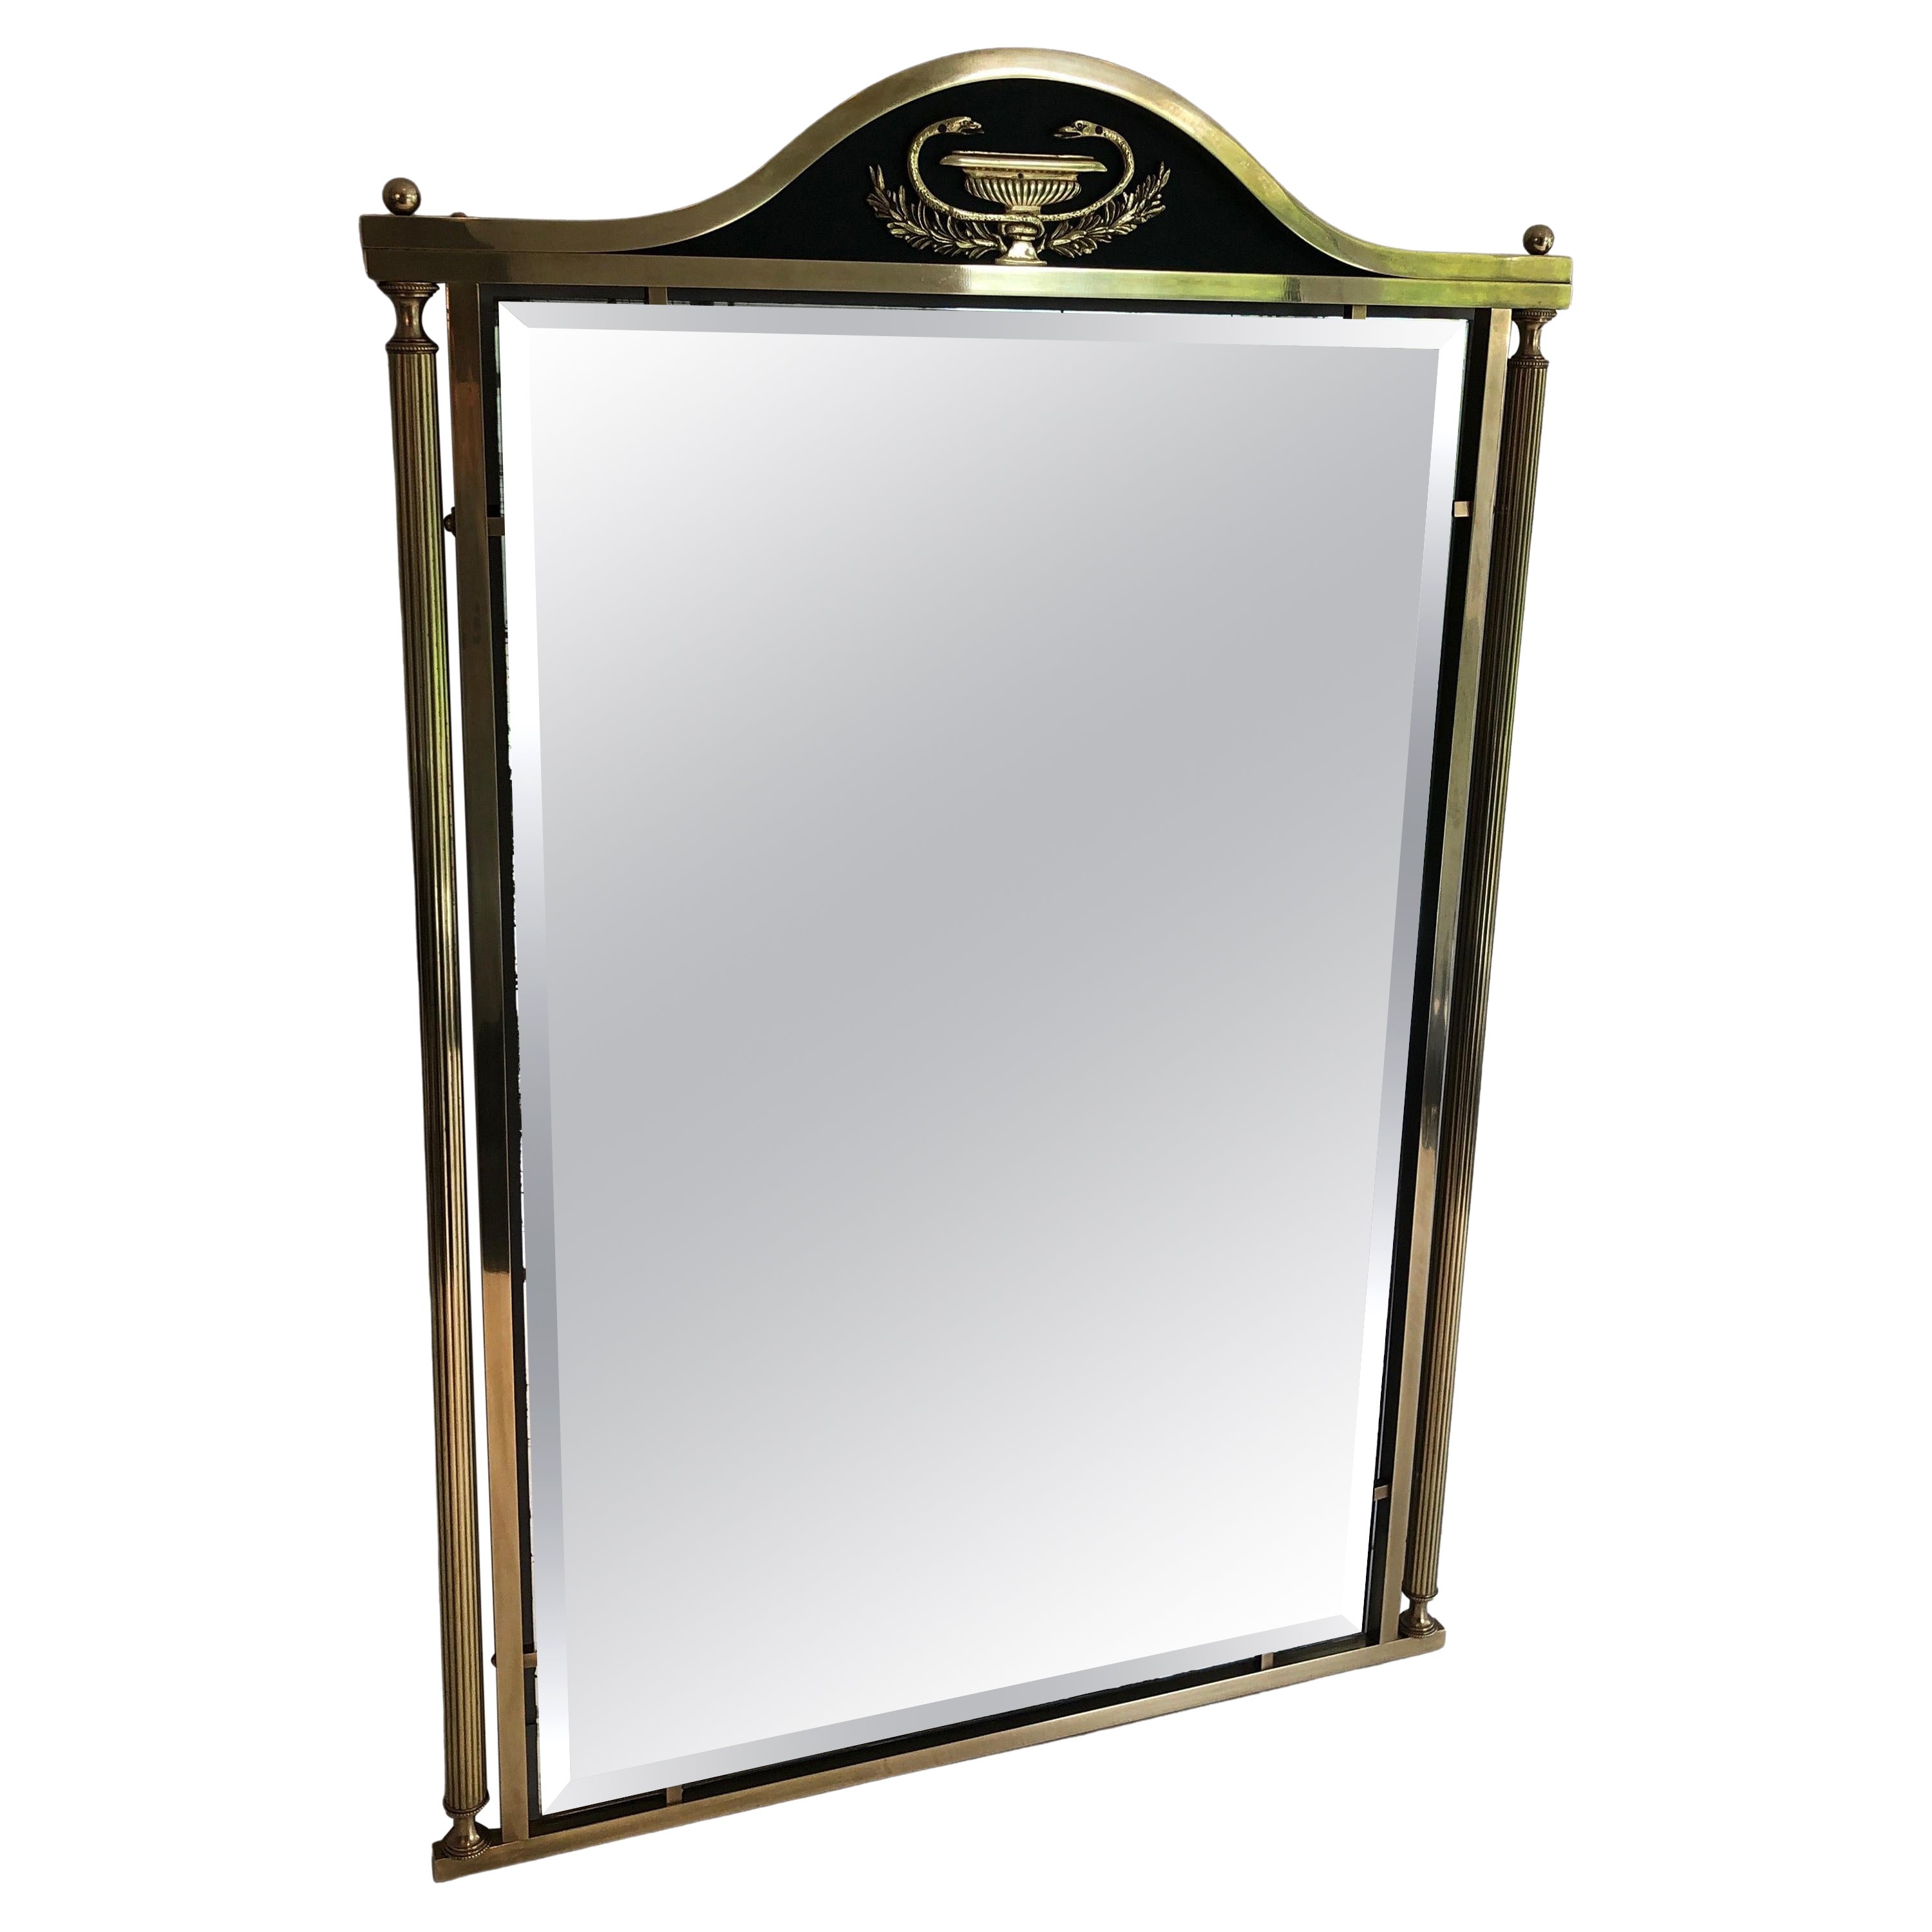 Neoclassical Style Brass and Lacquered Metal Mirror with Cup and Swan Necks.